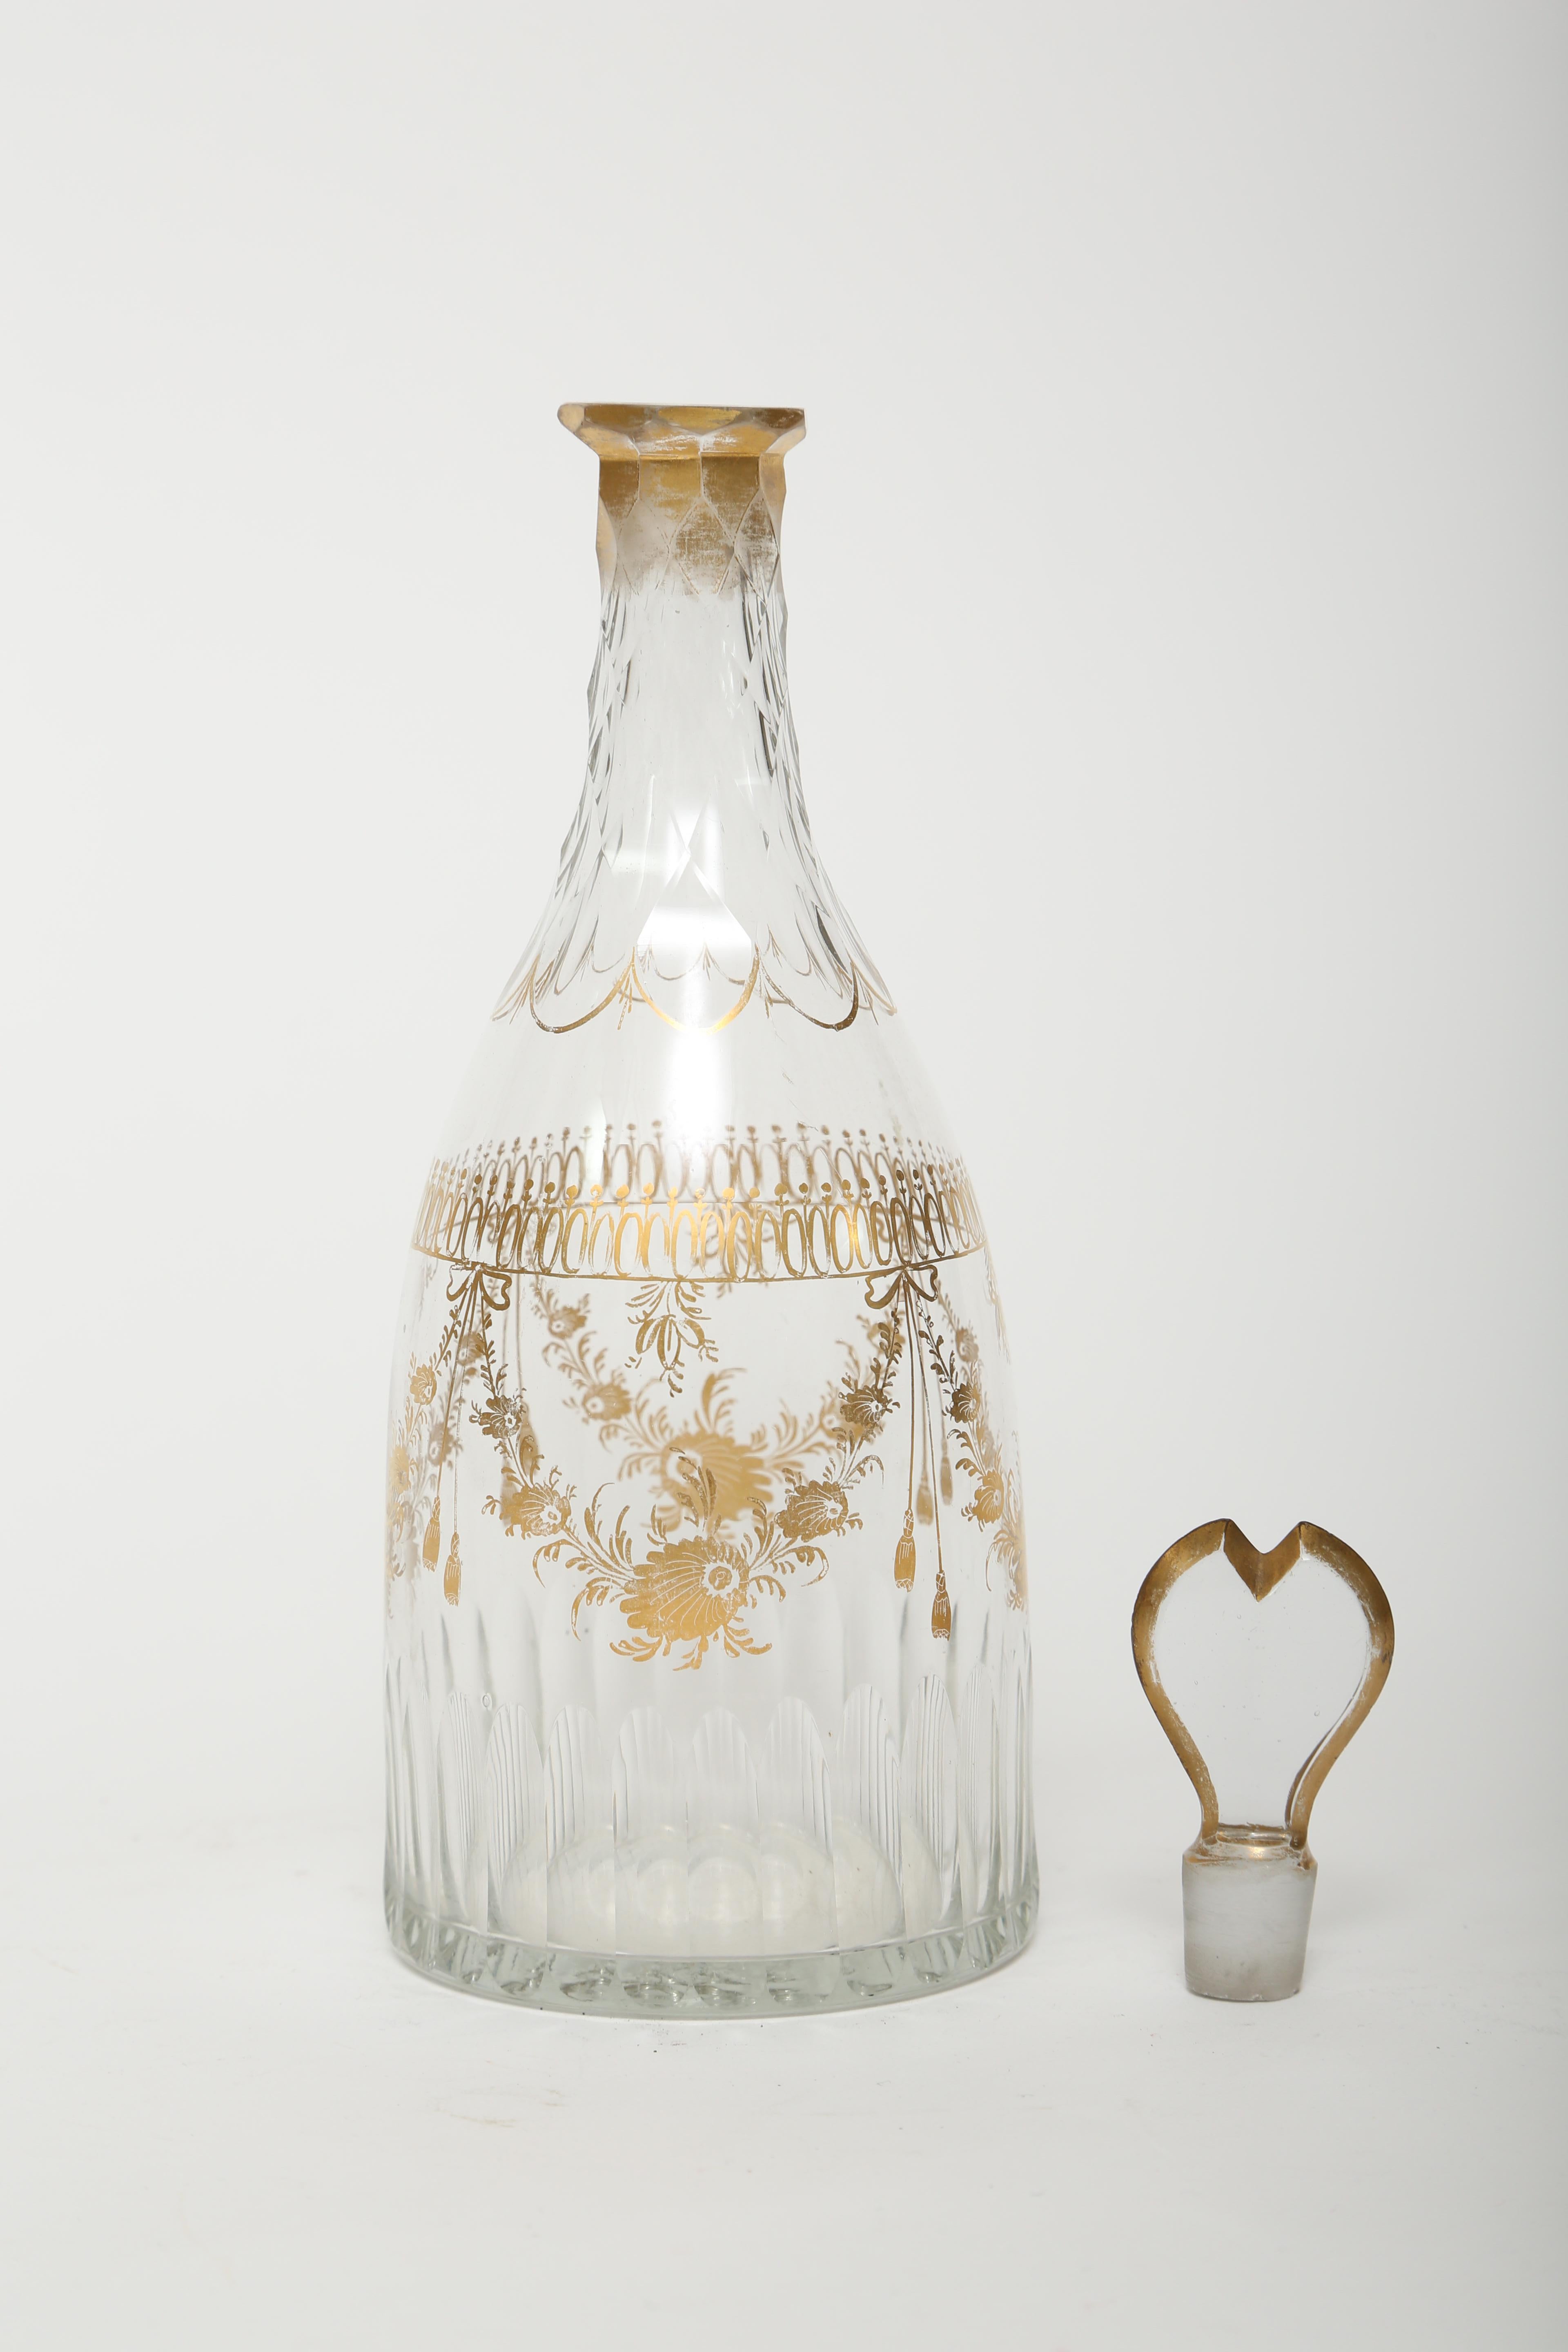 Antique 18th century blown decanter and single glass. (There is a second glass with a repair which will be included at no charge). This style of decanter so popular in the eighteenth century is referred to as a tapered body. The neck is silesian cut